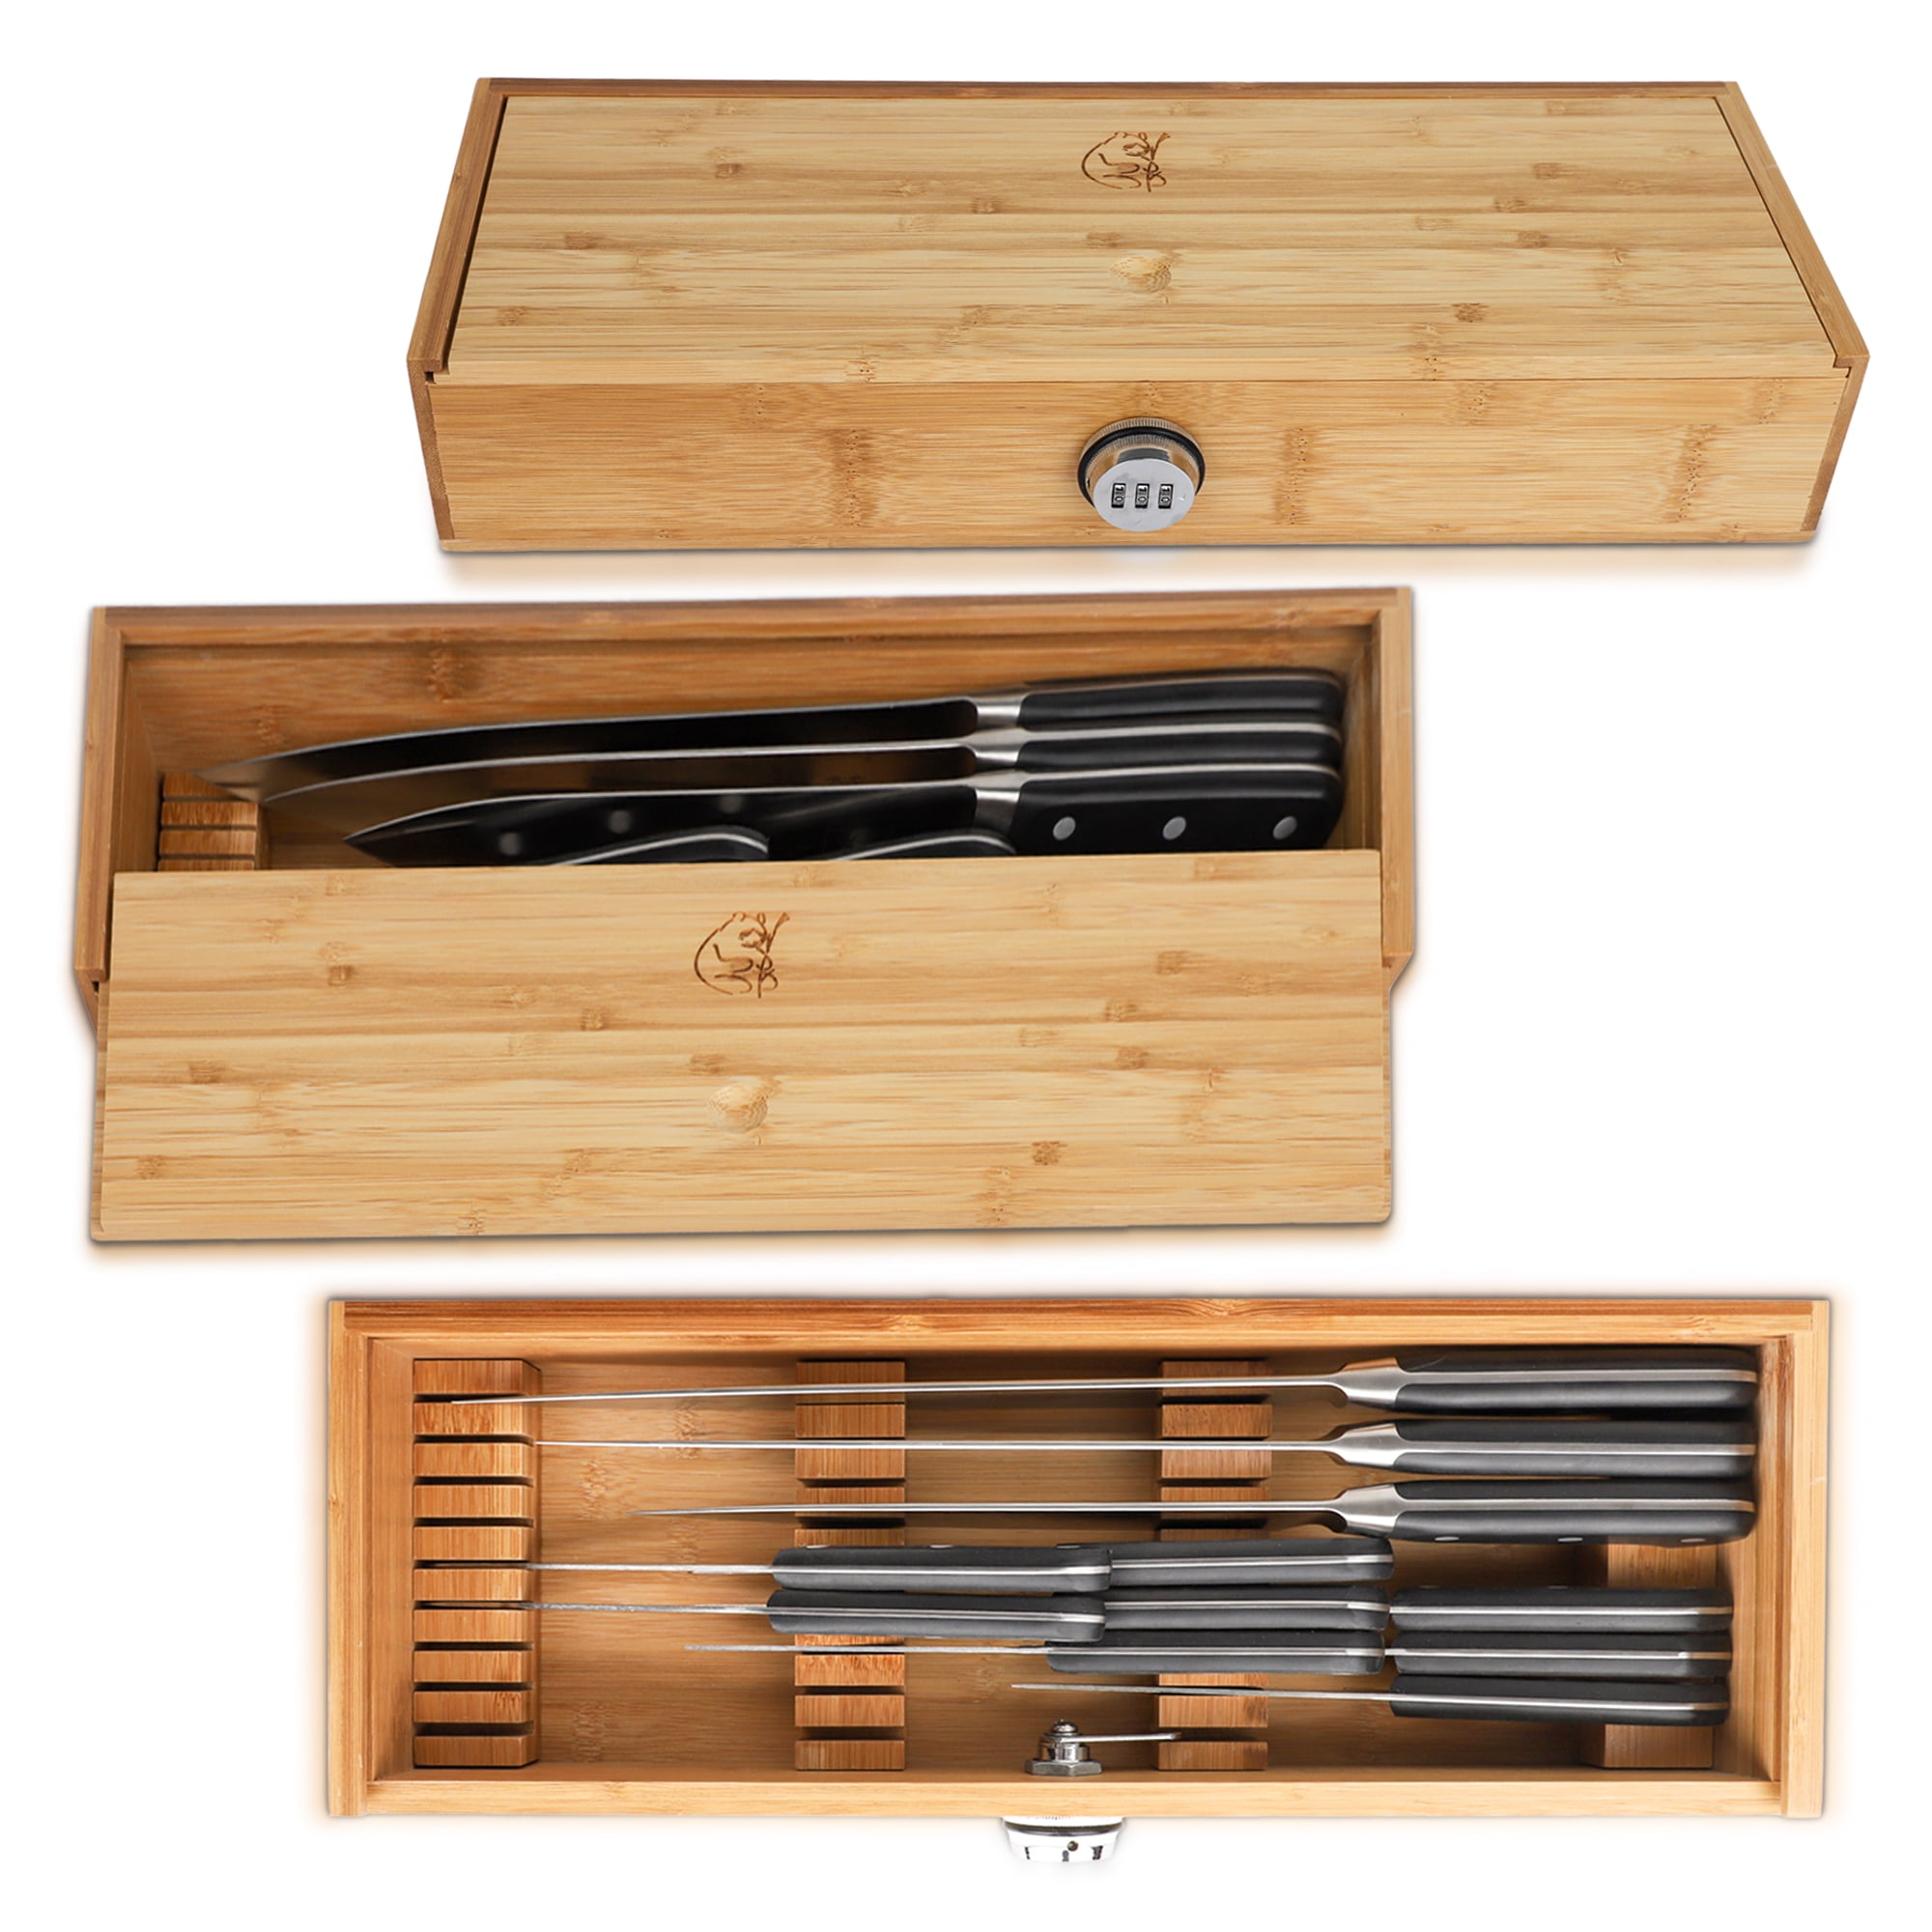 In Drawer Bamboo Chef Knives/Kitchen Knives Organizer Box - with Kid Safety  combination lock - Holds up to 25 Knives (Not included) - Knives storage